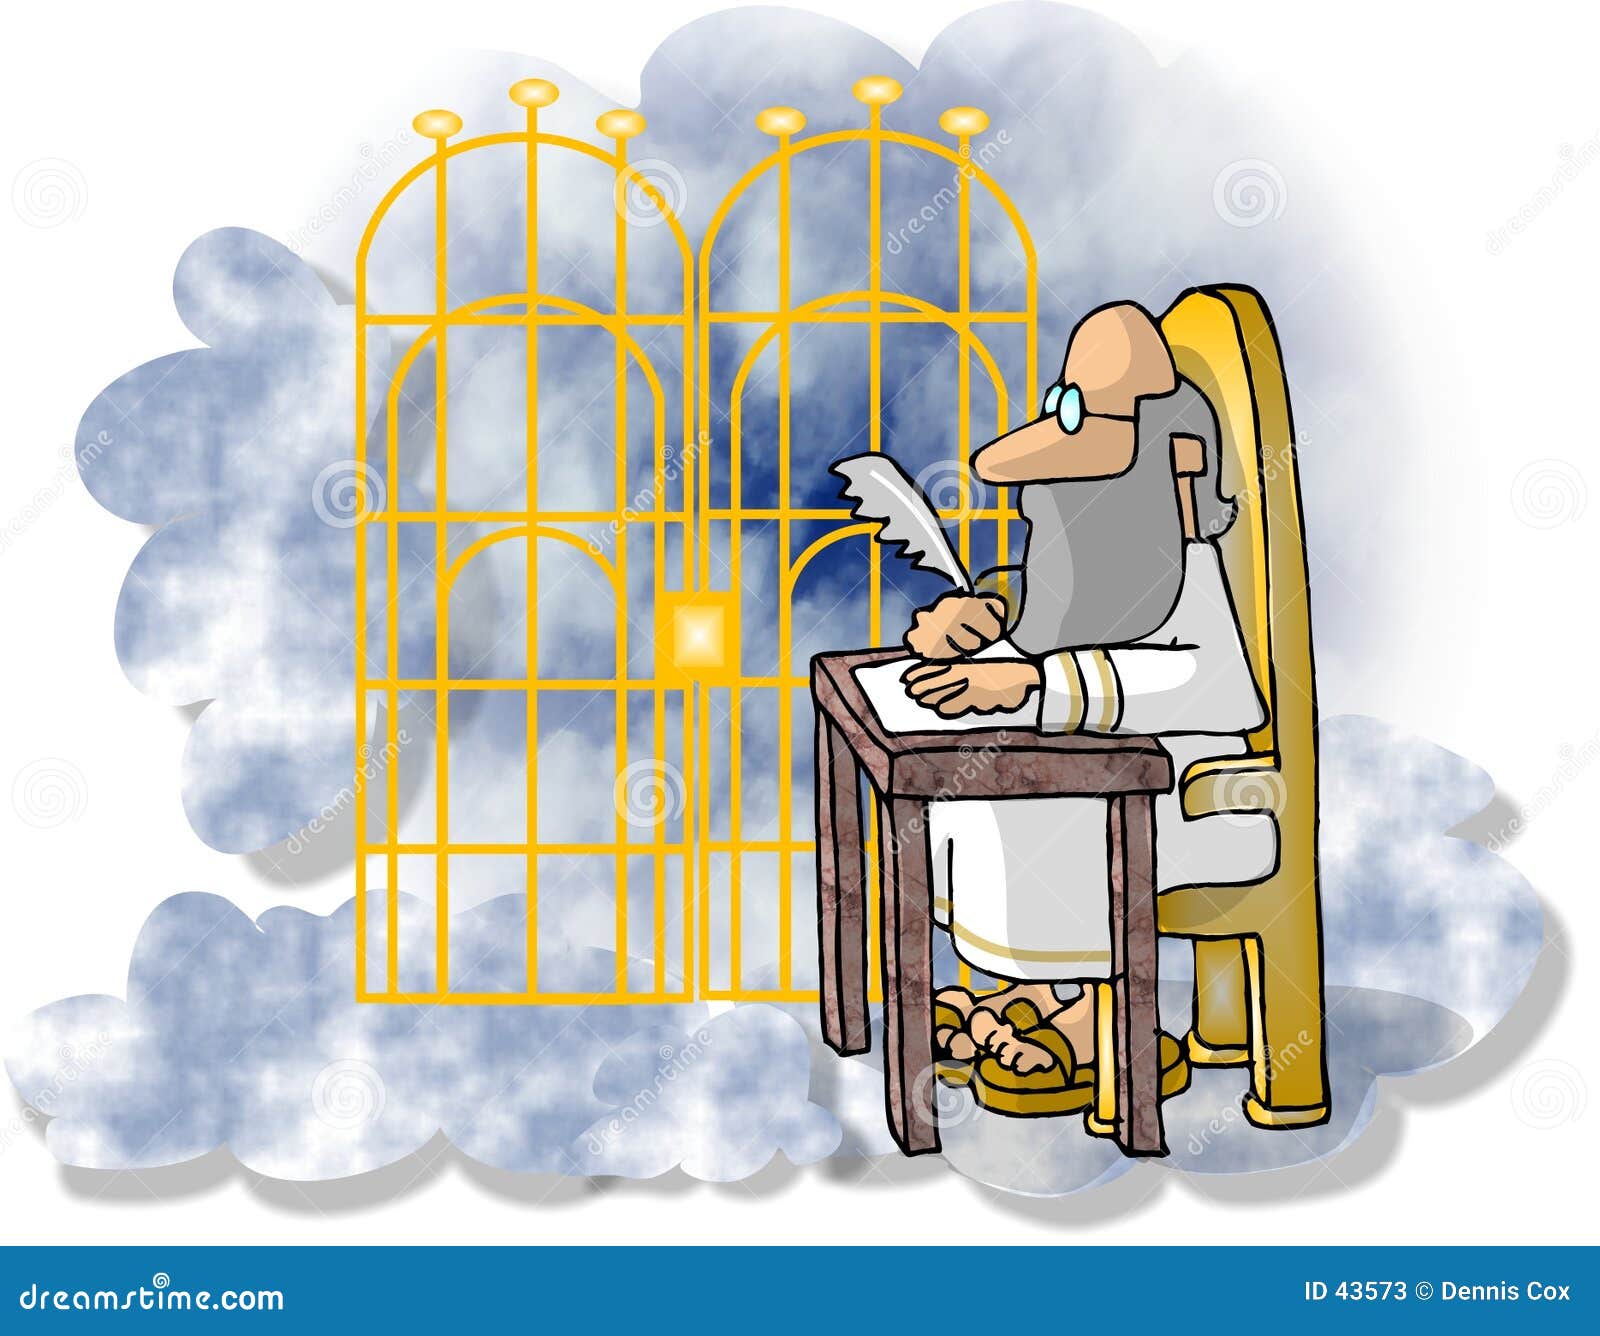 pearly gates clipart free - photo #8